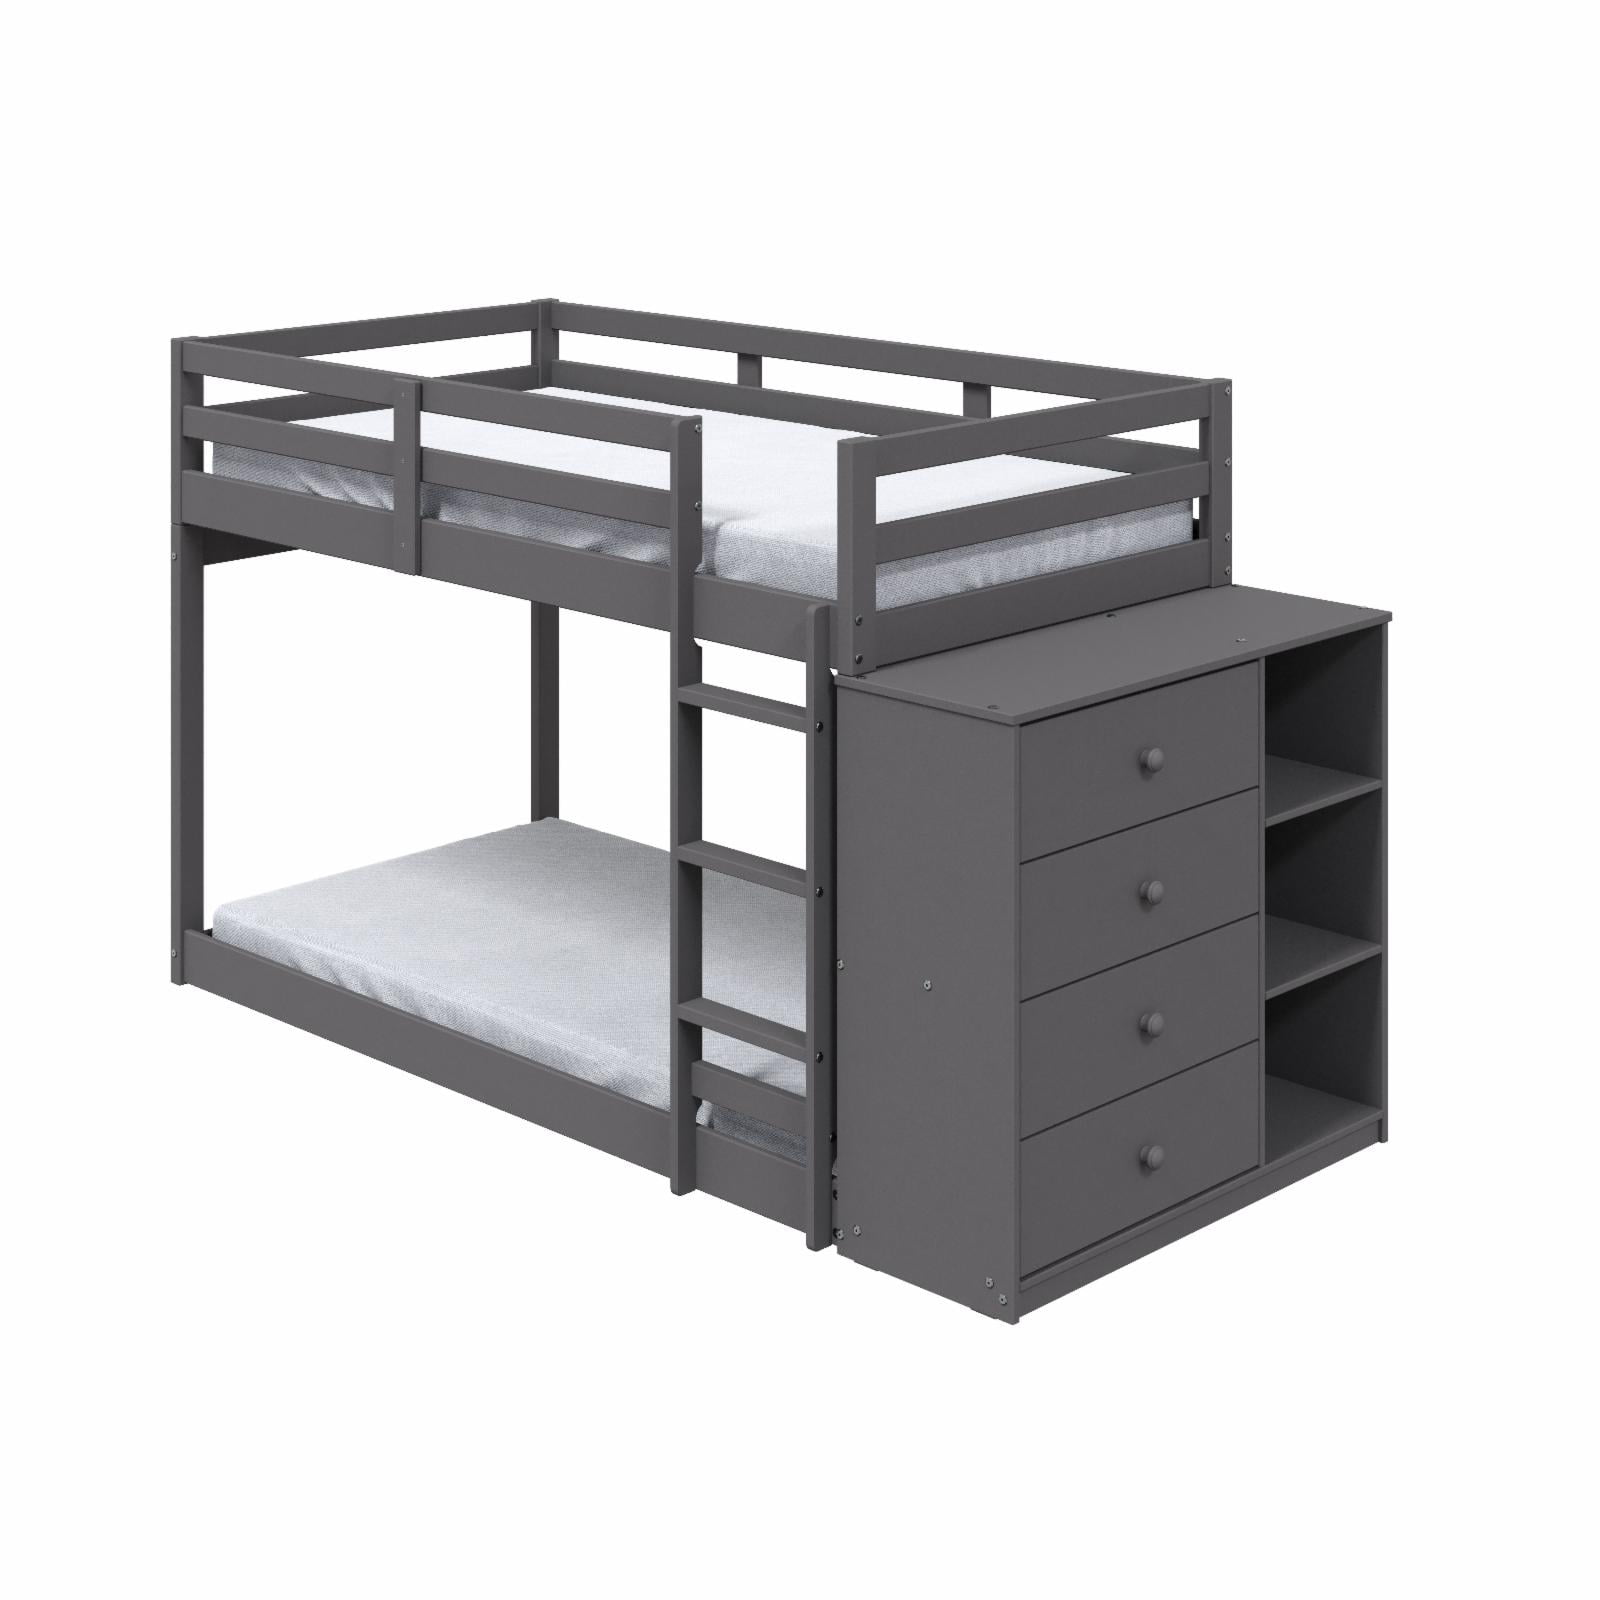 Picture of Acme Furniture BD01372 93 x 44 x 54 in. Gaston Bunk Bed with Cabinet, Gray - Twin Size